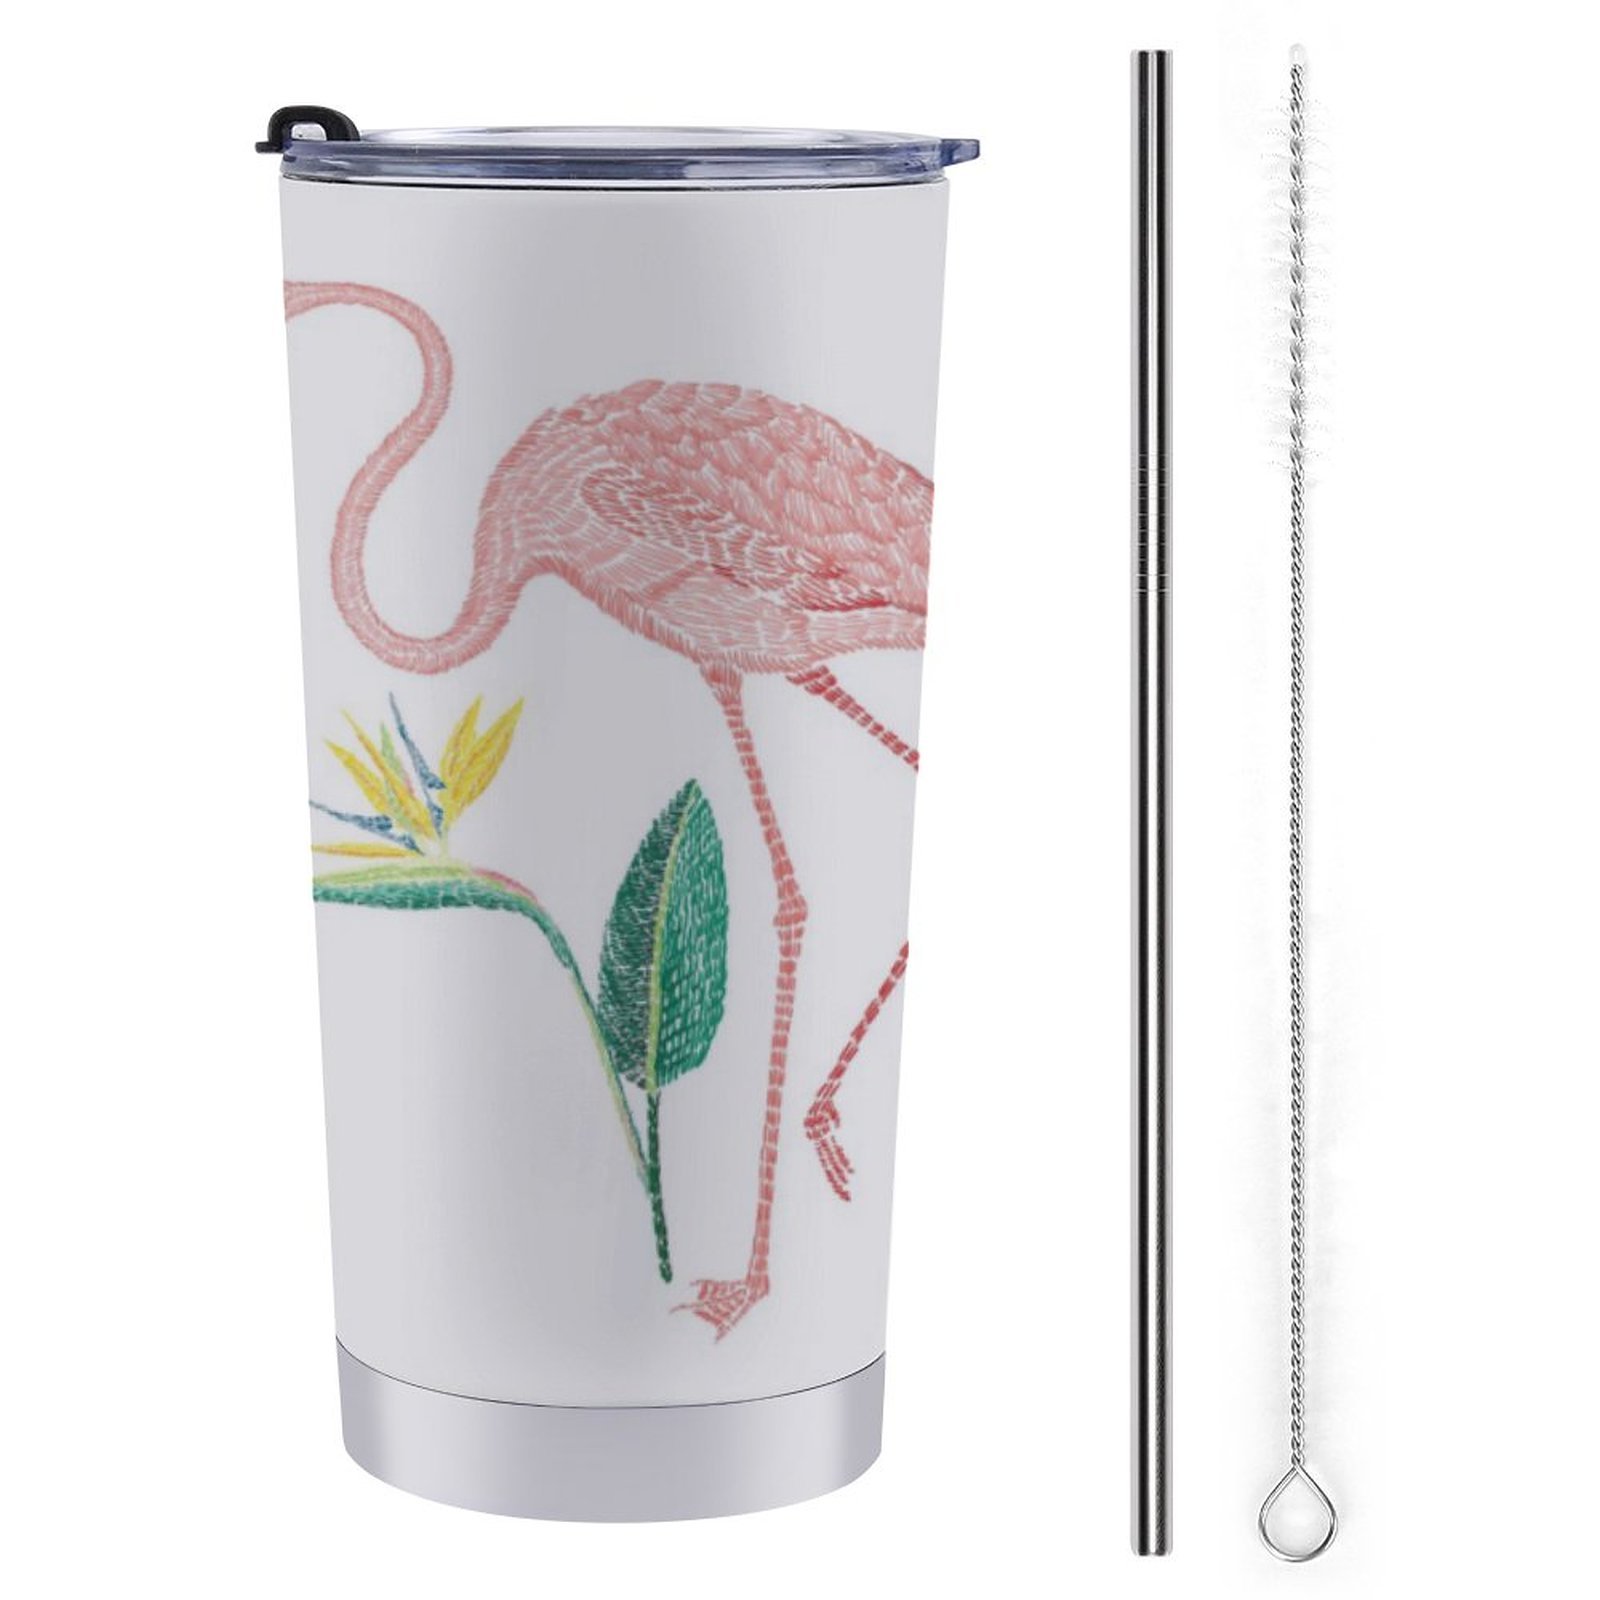 Primary image for Mondxflaur Flamingos Steel Thermal Mug Thermos with Straw for Coffee